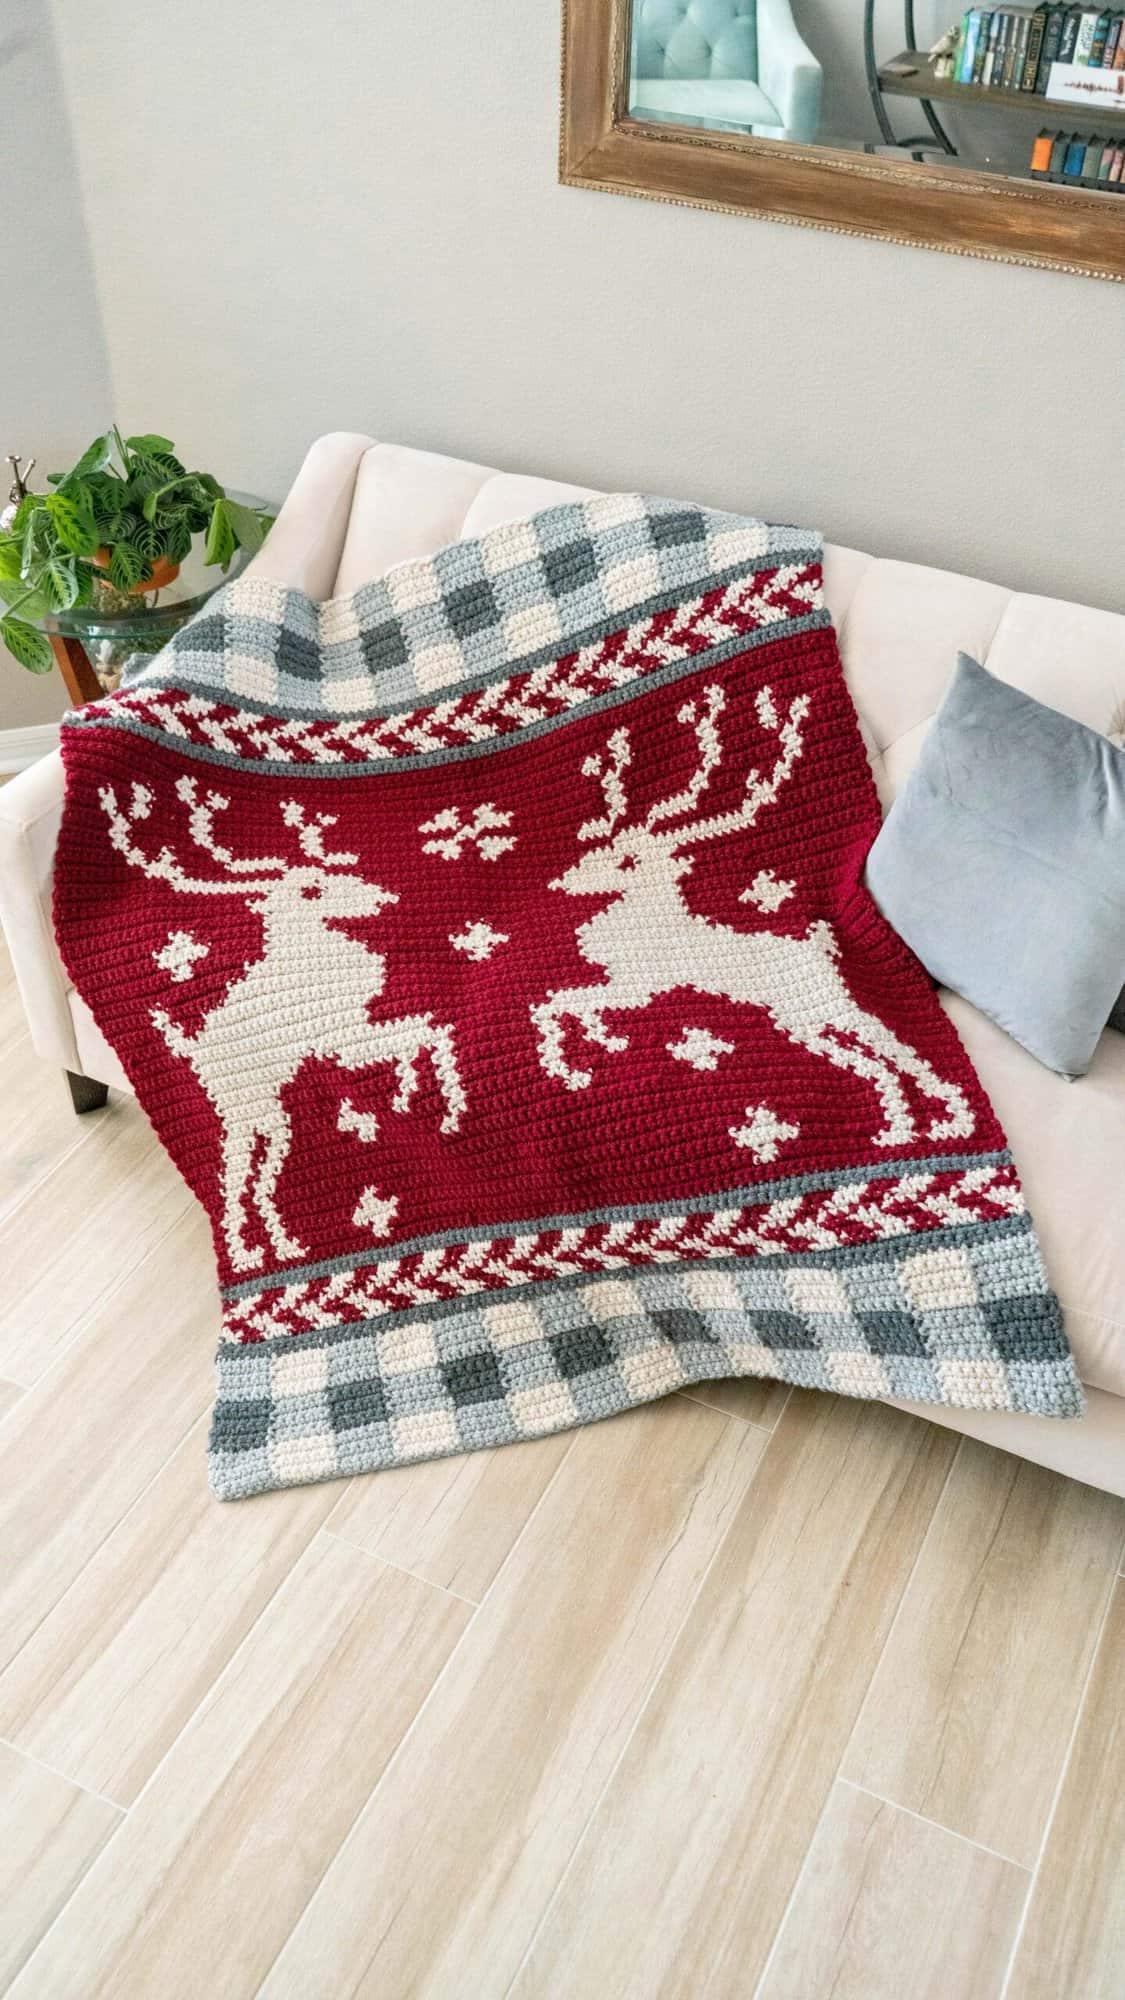 A couch with a crocheted reindeer Prancing Through the Holidays blanket on it.